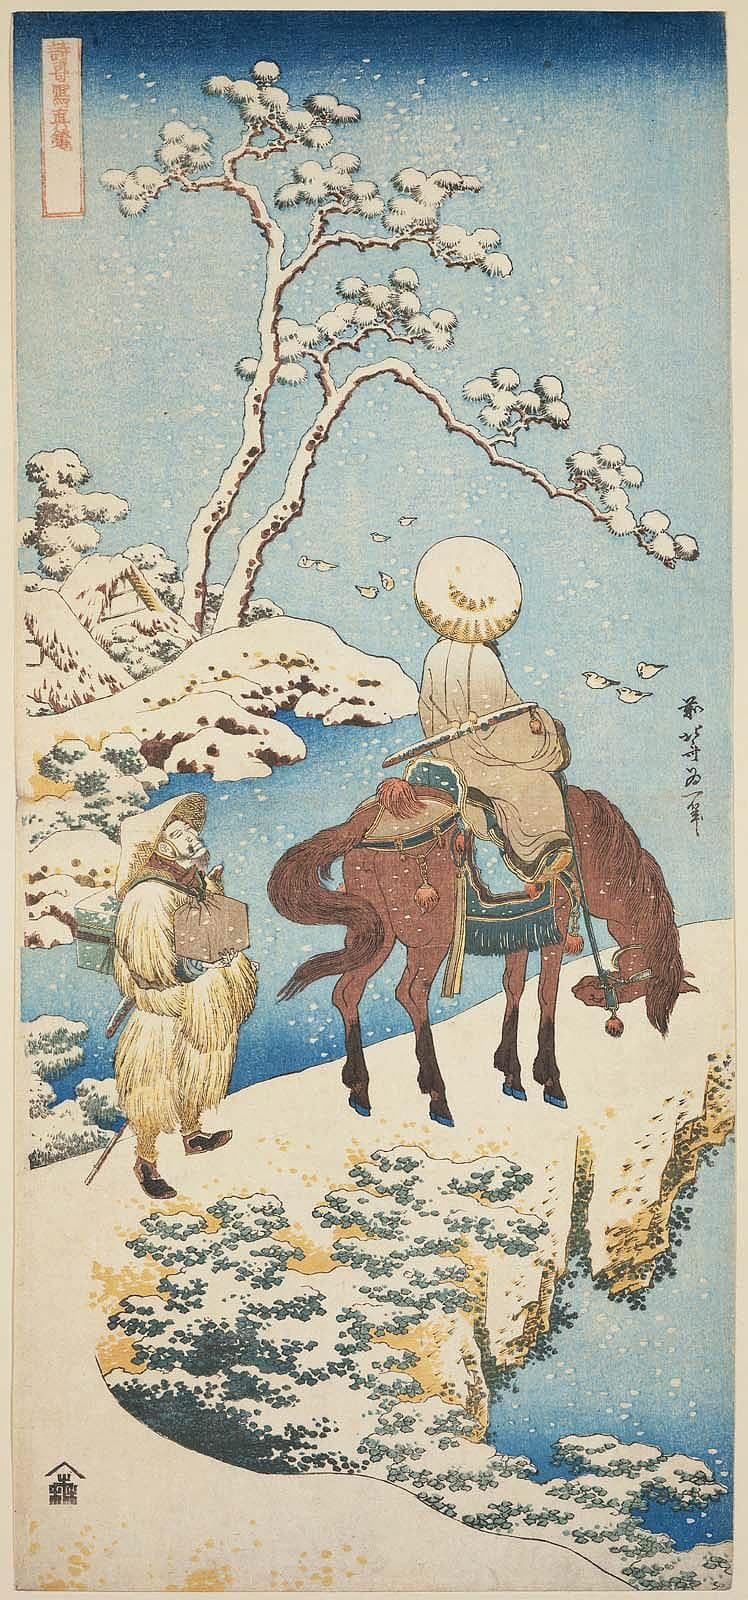 Hokusai: A True Mirror of Chinese and Japanese Poetry: Traveller in Snow, 1834-35 (Boston: Museum of Fine Art)